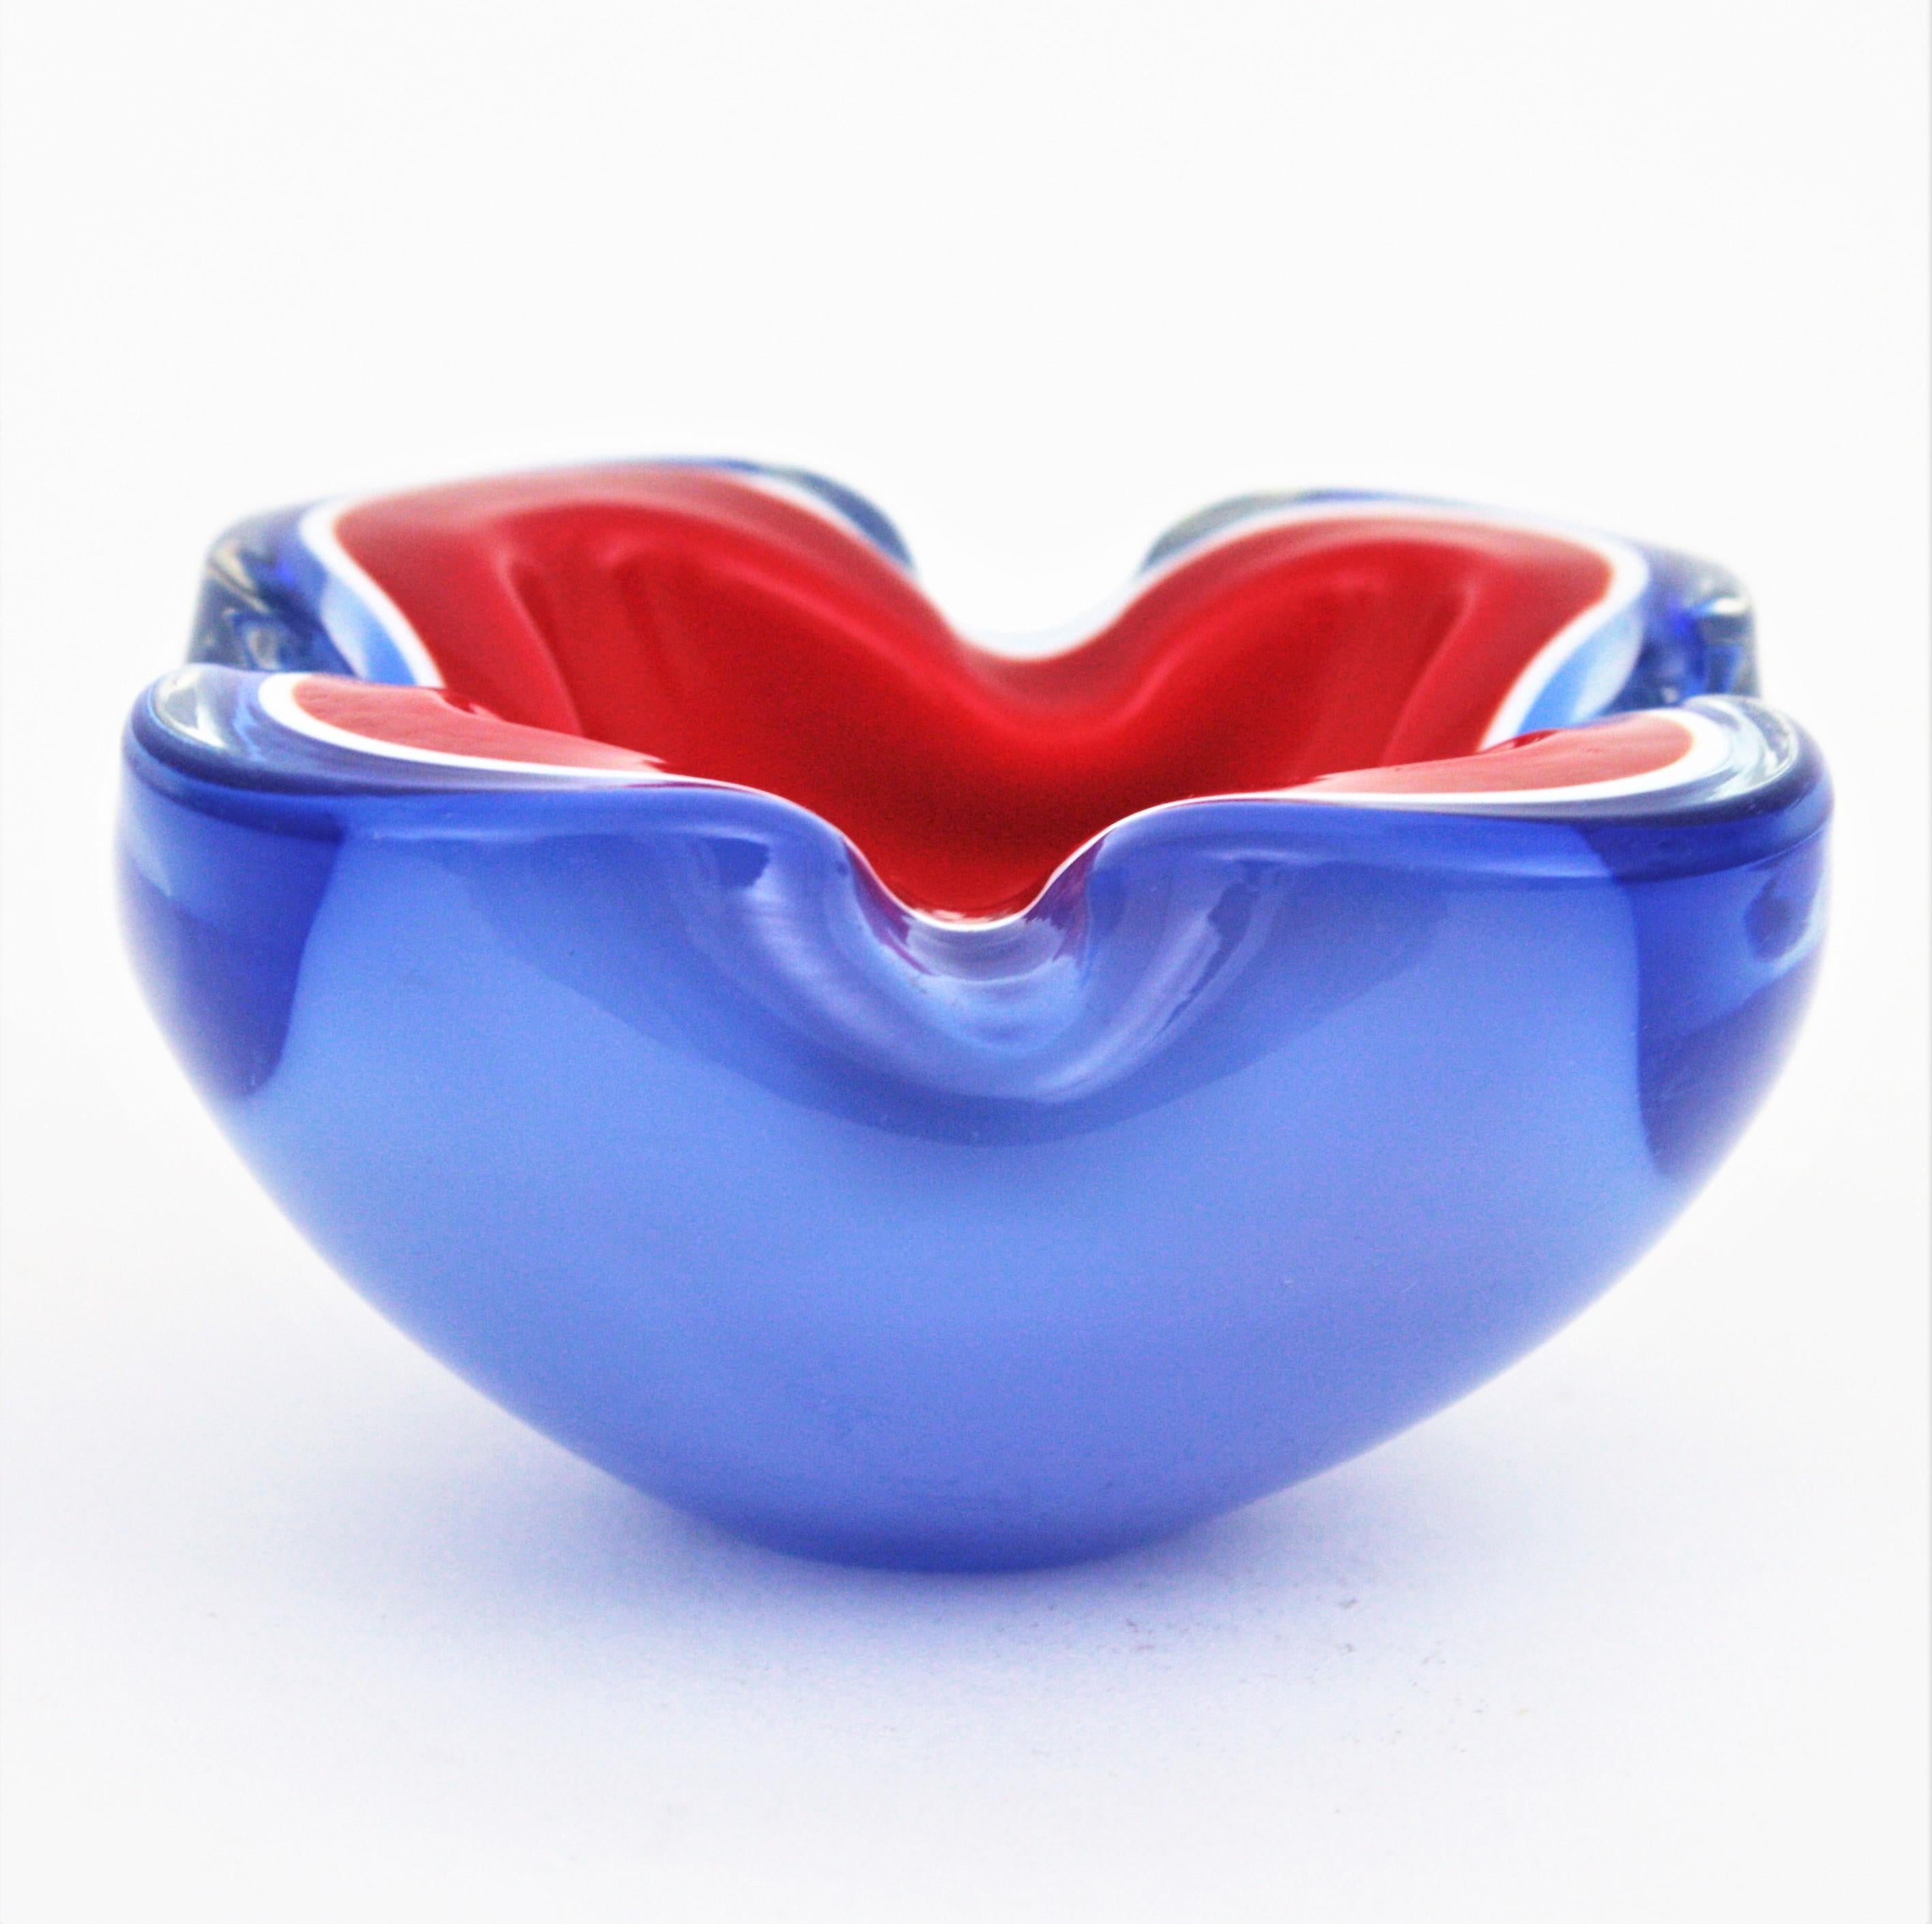 Blown glass Sommerso Murano bowl /ashtray with folded rim. Attributed to Archimede Seguso, Italy, 1950s-1960s.
Triple cased red, white and blue blue glass with the Sommerso technique. It has highly decorative shapes and it is an spectacular piece